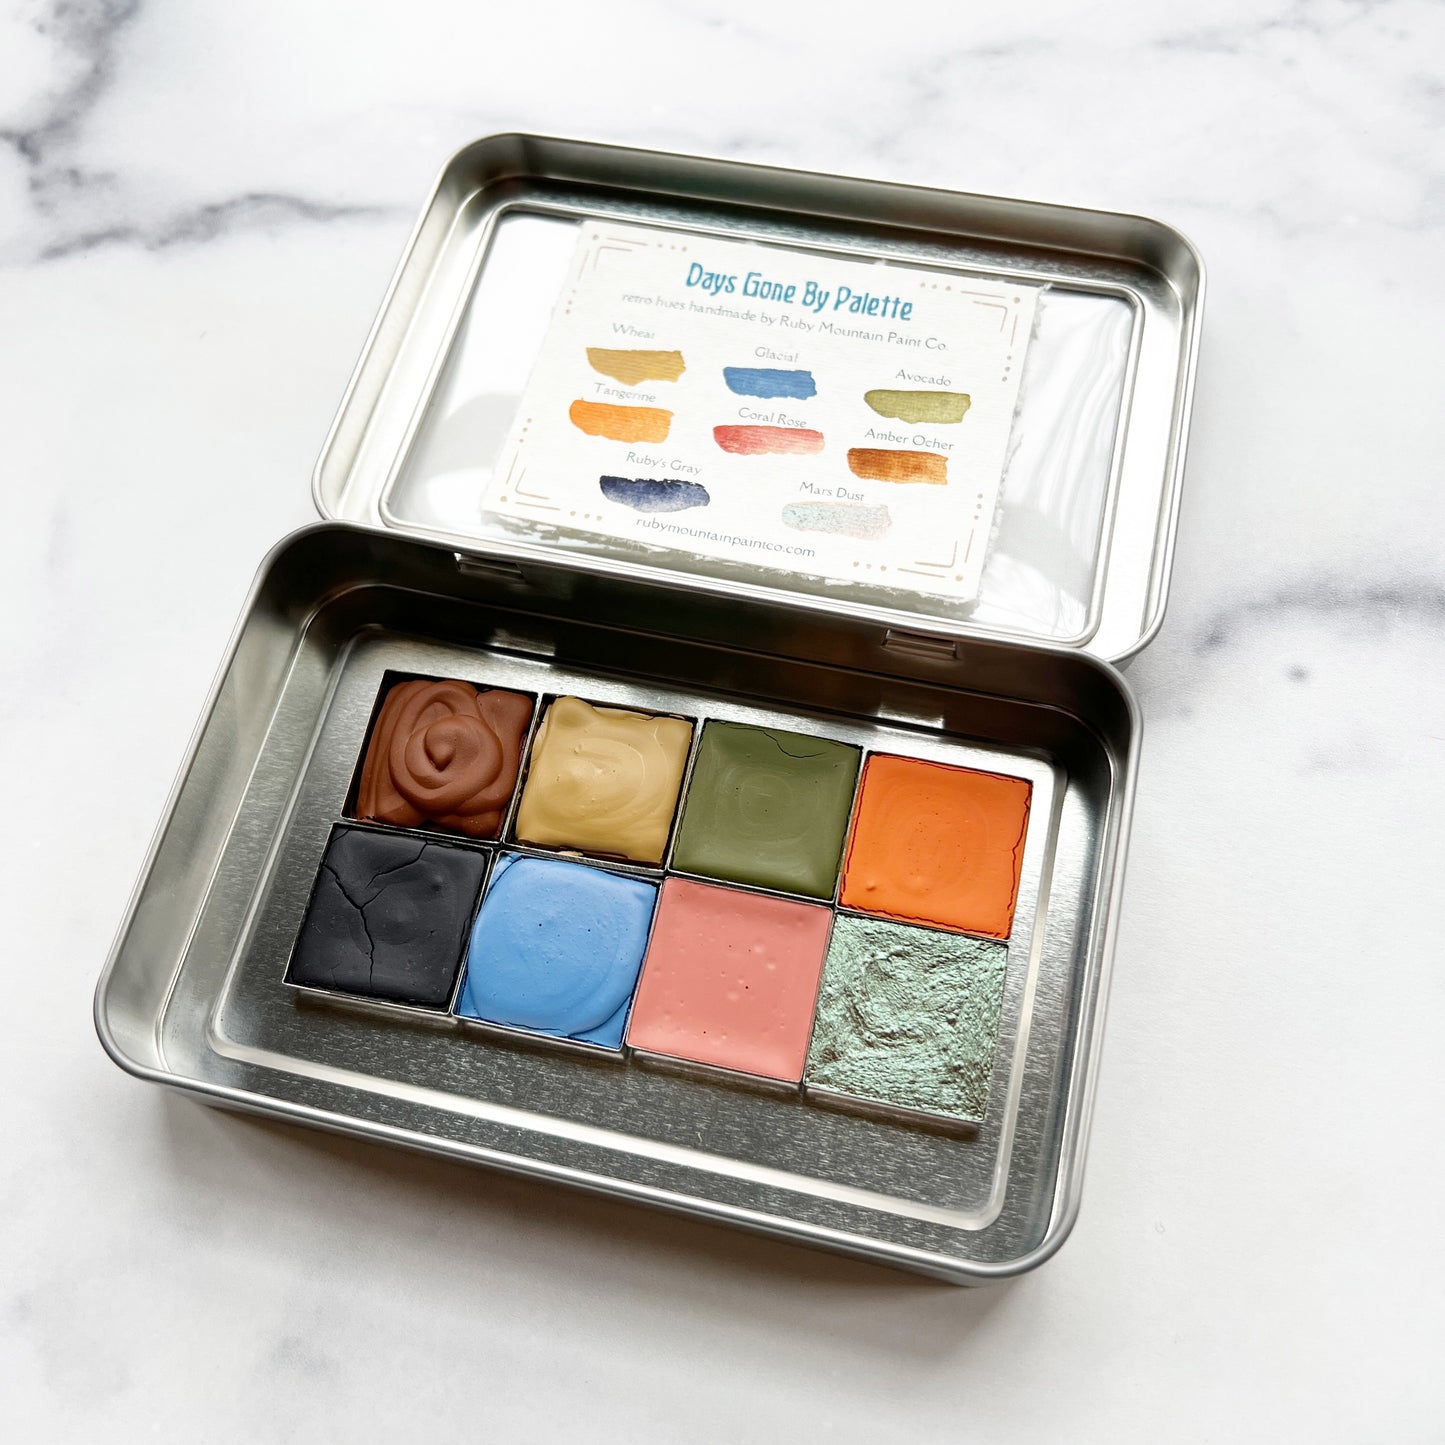 Days Gone By Half Pan Palette, eight retro-inspired hues of handmade watercolors